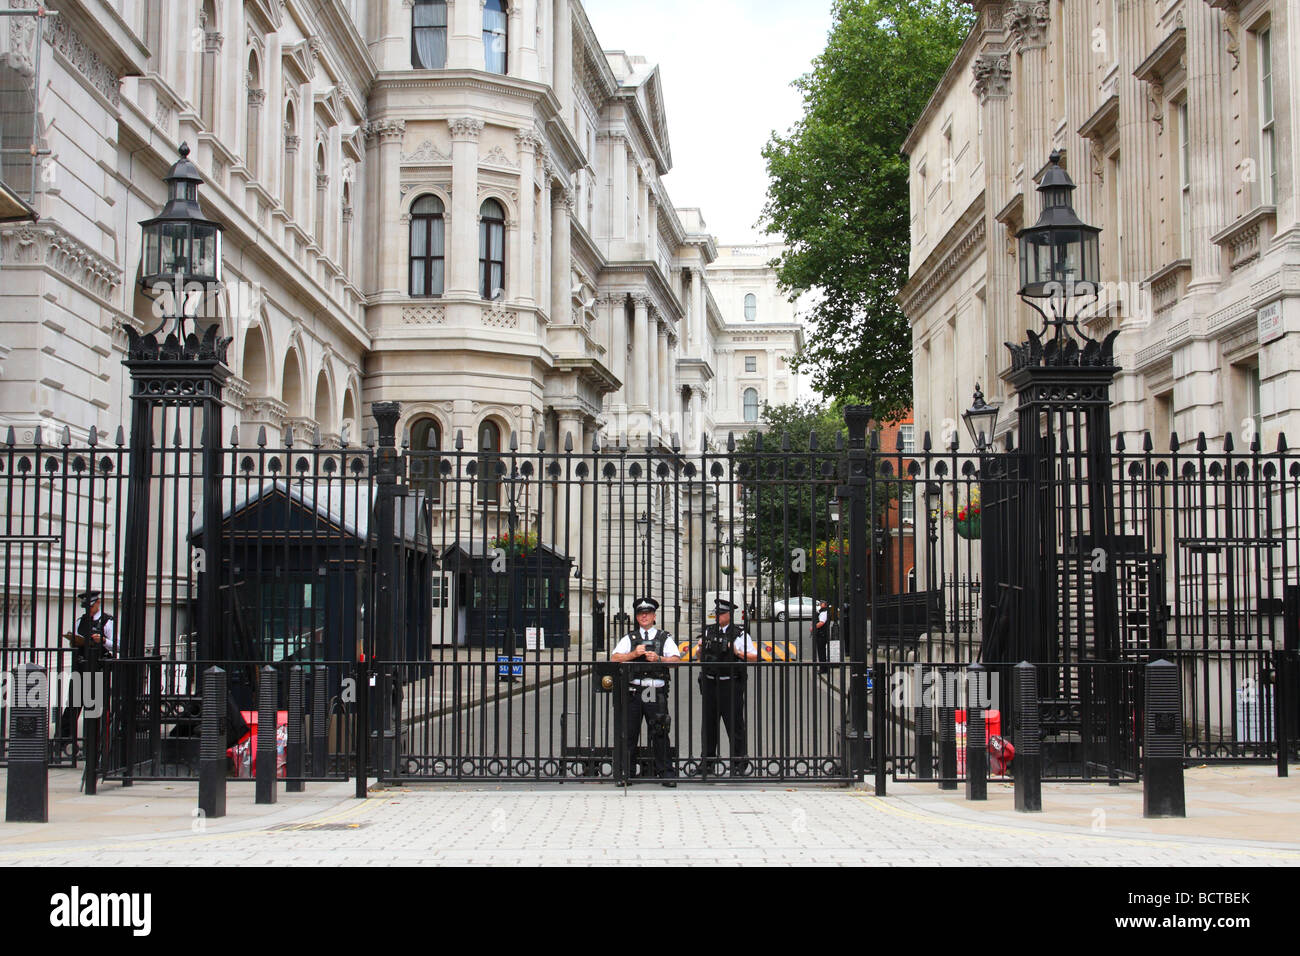 Downing Street, Westminster, Londres, Angleterre, Royaume-Uni Banque D'Images